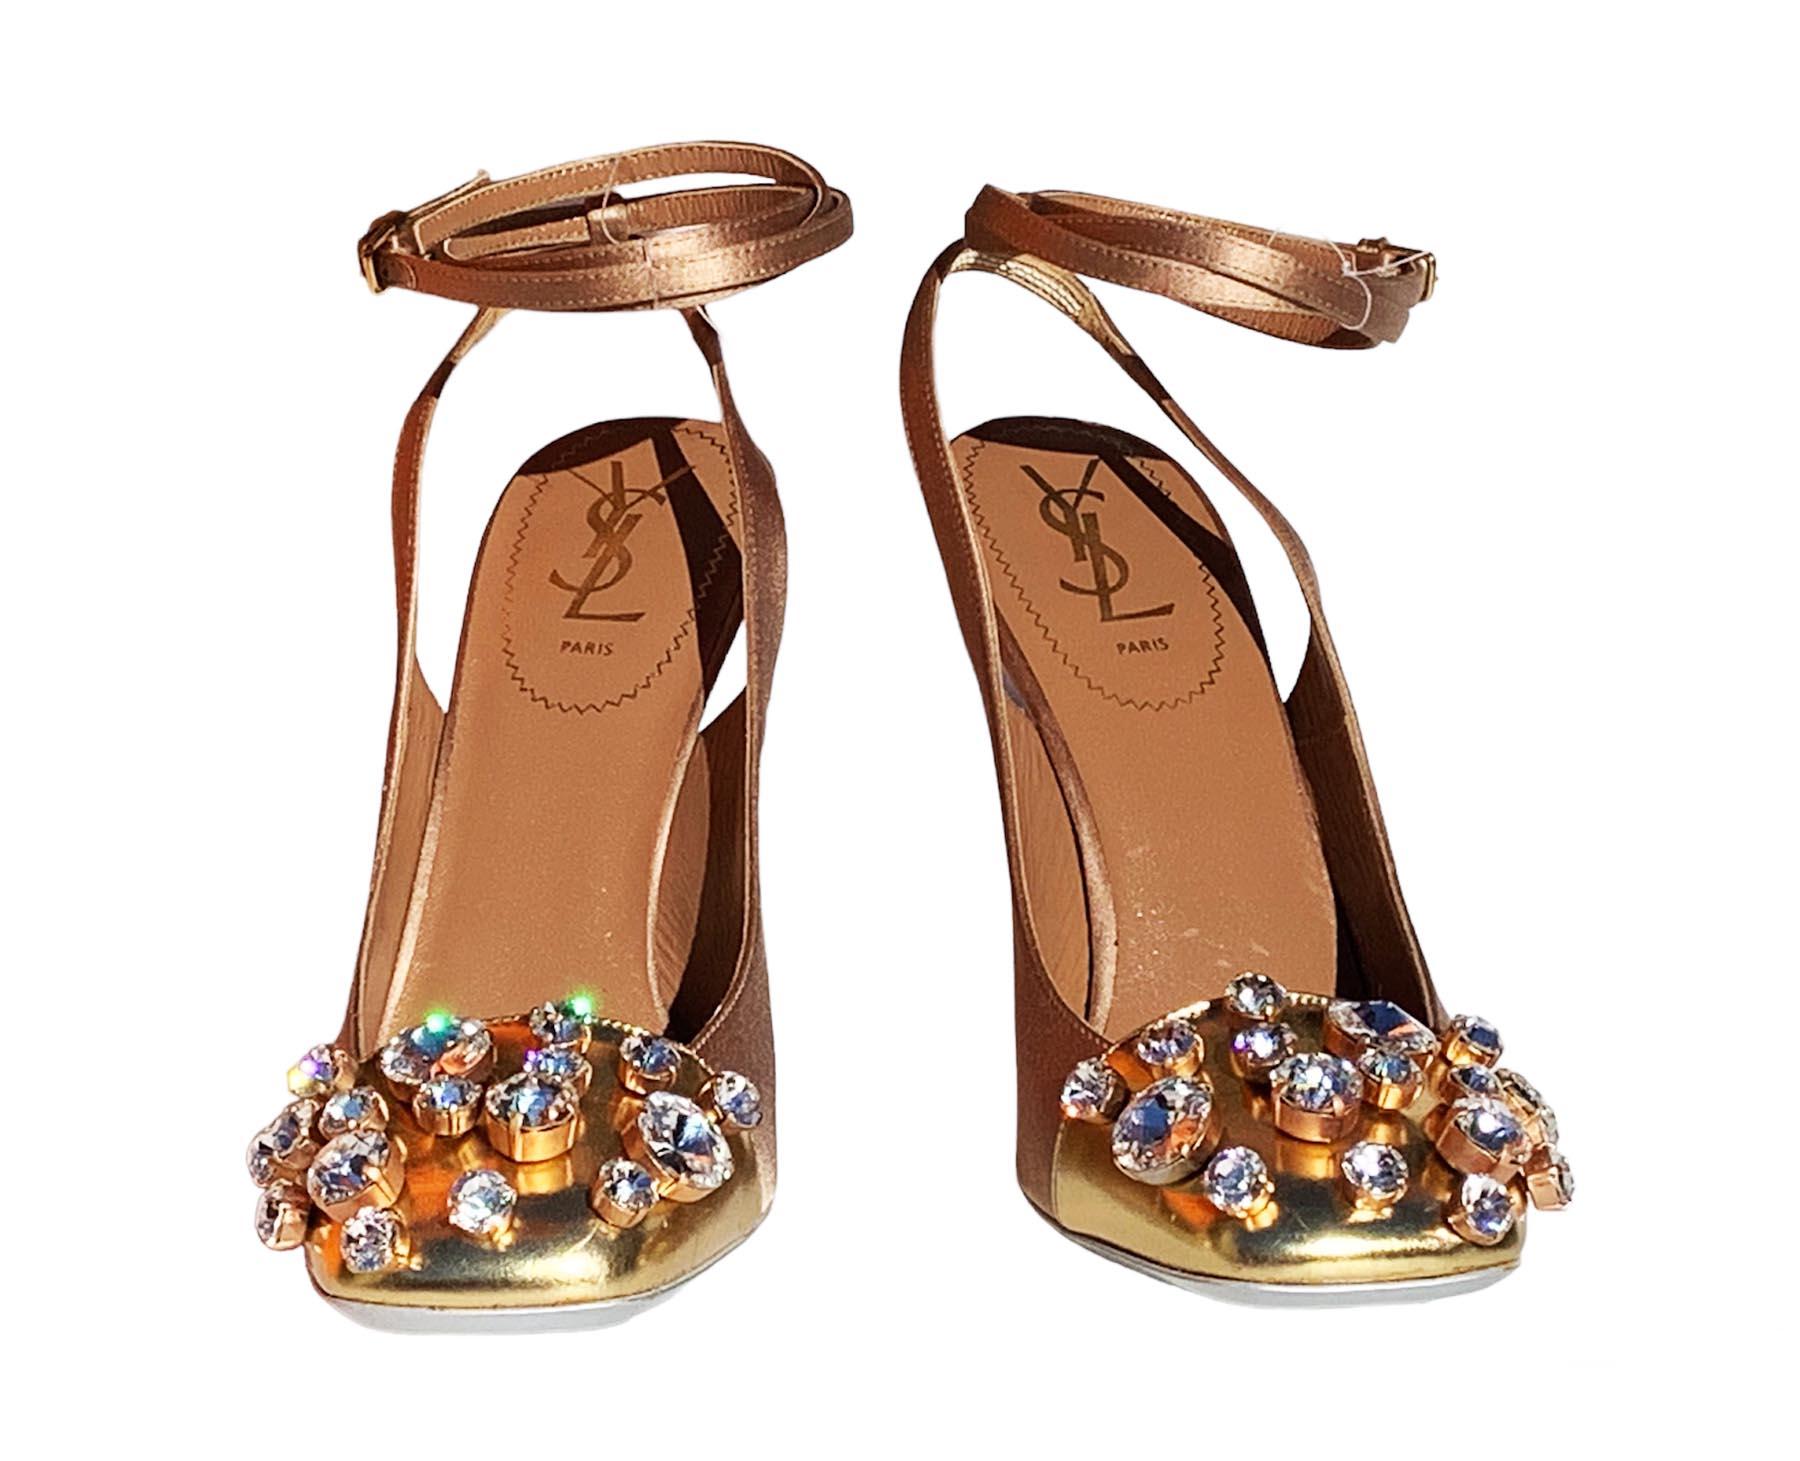 Yves Saint Laurent Rive Gauche Crystal Embellished Sandals Slingback
Italian size 39.5
S/S 2012 Runway Collection
Nude Color Satin, Gold Tone Leather Toe Embellished with Oversize Clear Crystals,
Ankle Wrap with Buckle, Leather Insole and